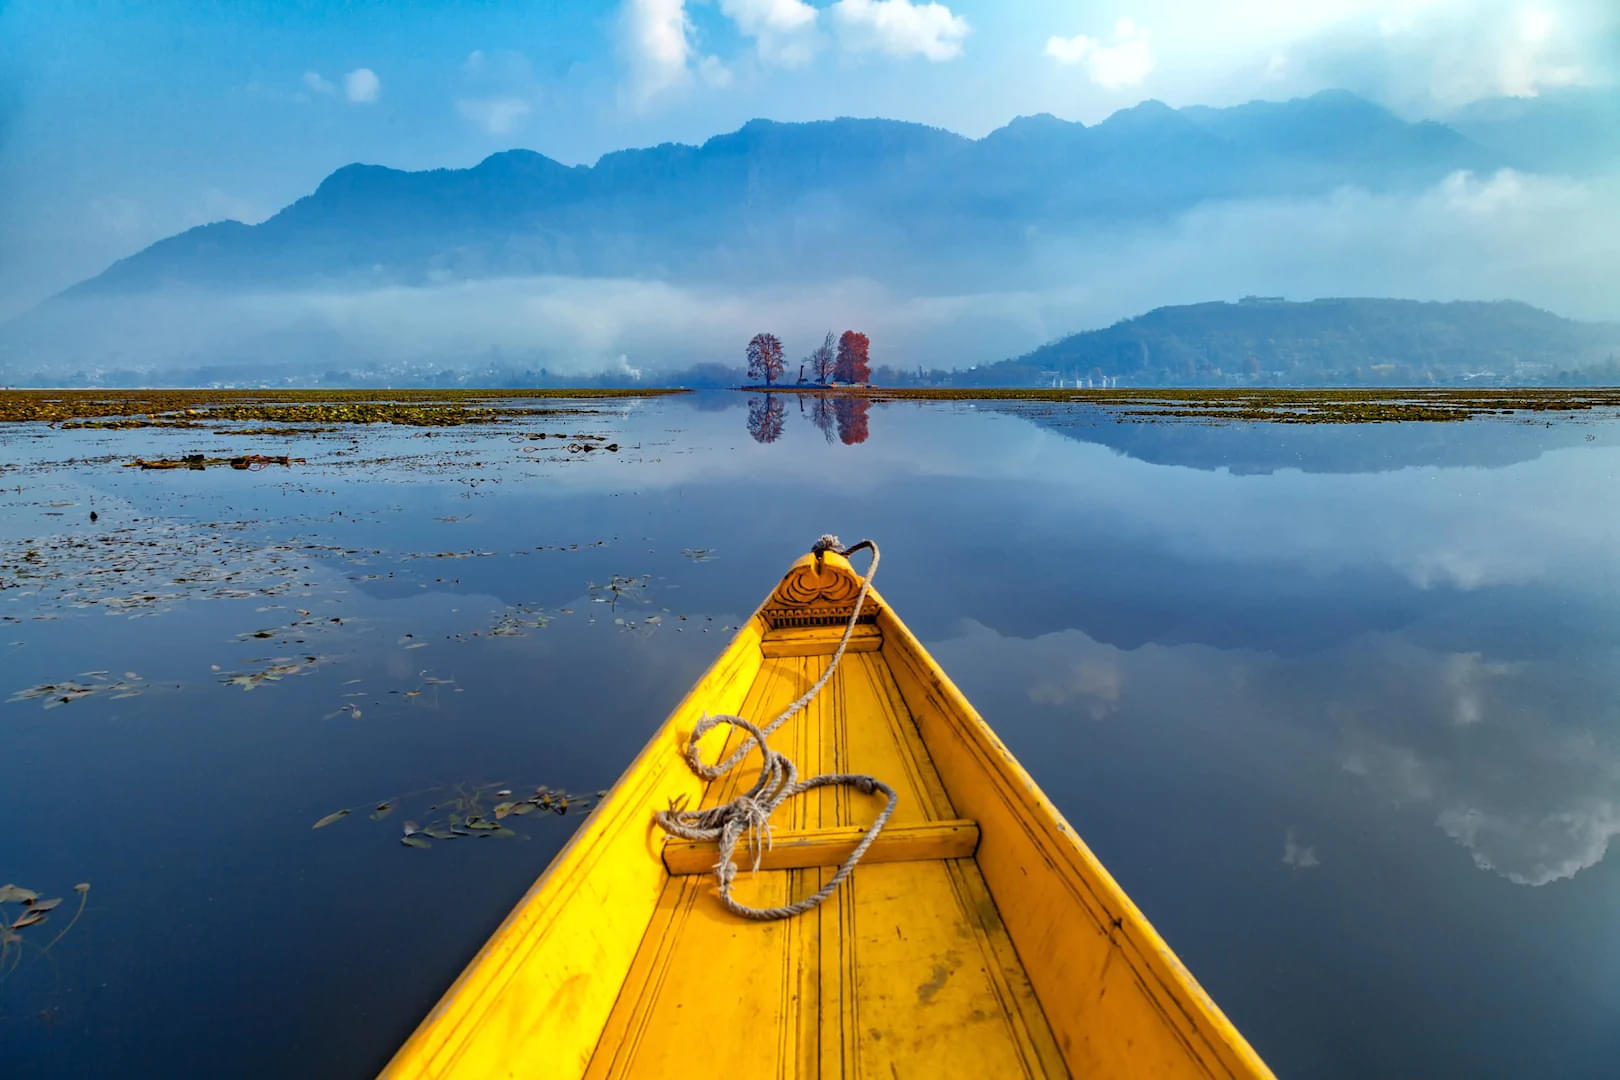 Srinagar, with its unique blend of natural beauty, offers an experience of its cultural heritage, spiritual traditions and a truly unforgettable travel experience.